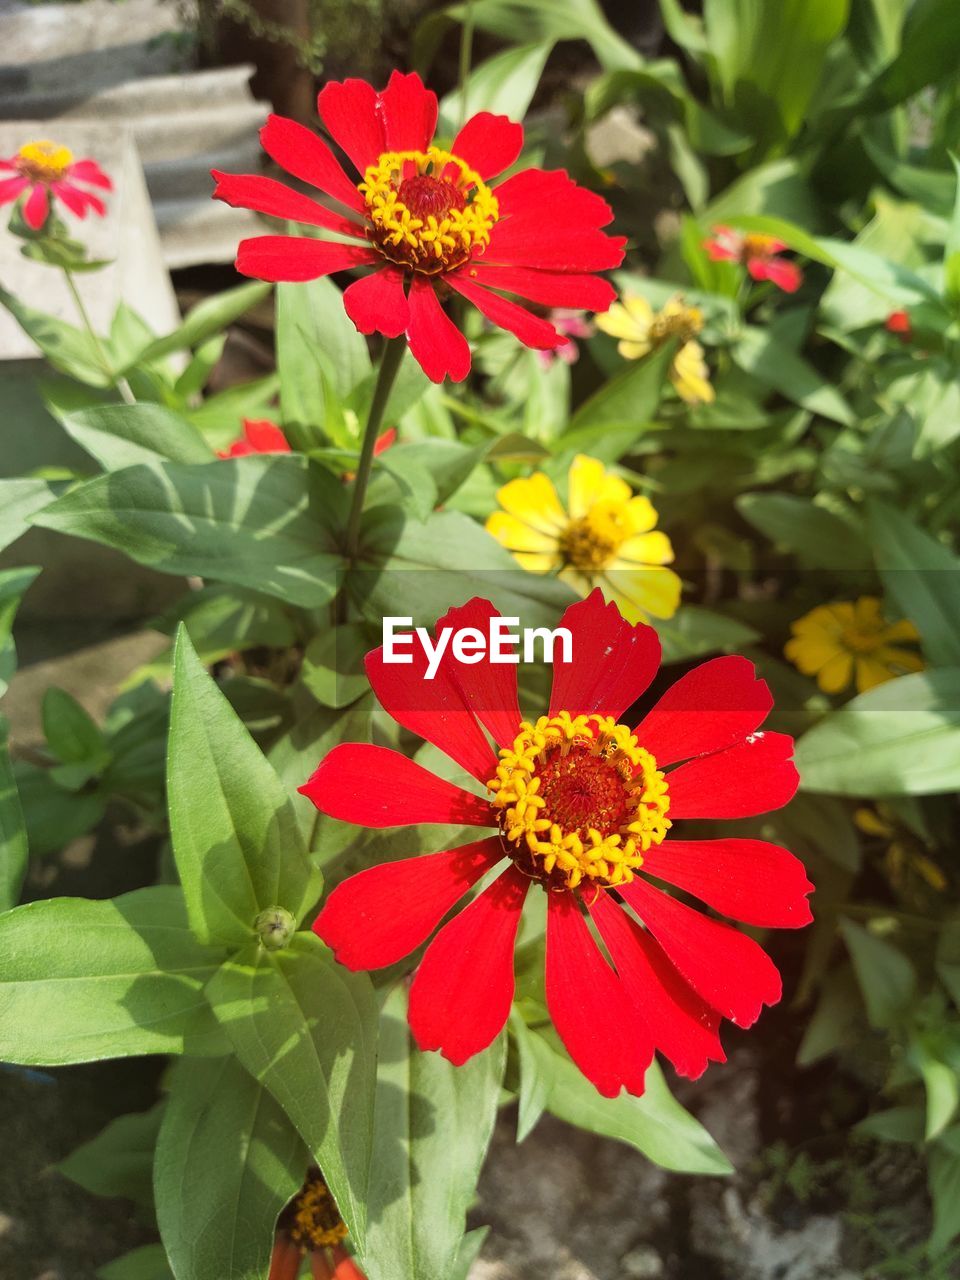 flower, flowering plant, plant, freshness, beauty in nature, growth, nature, flower head, plant part, close-up, leaf, fragility, petal, inflorescence, red, wildflower, no people, green, day, outdoors, zinnia, focus on foreground, multi colored, botany, high angle view, yellow, pollen